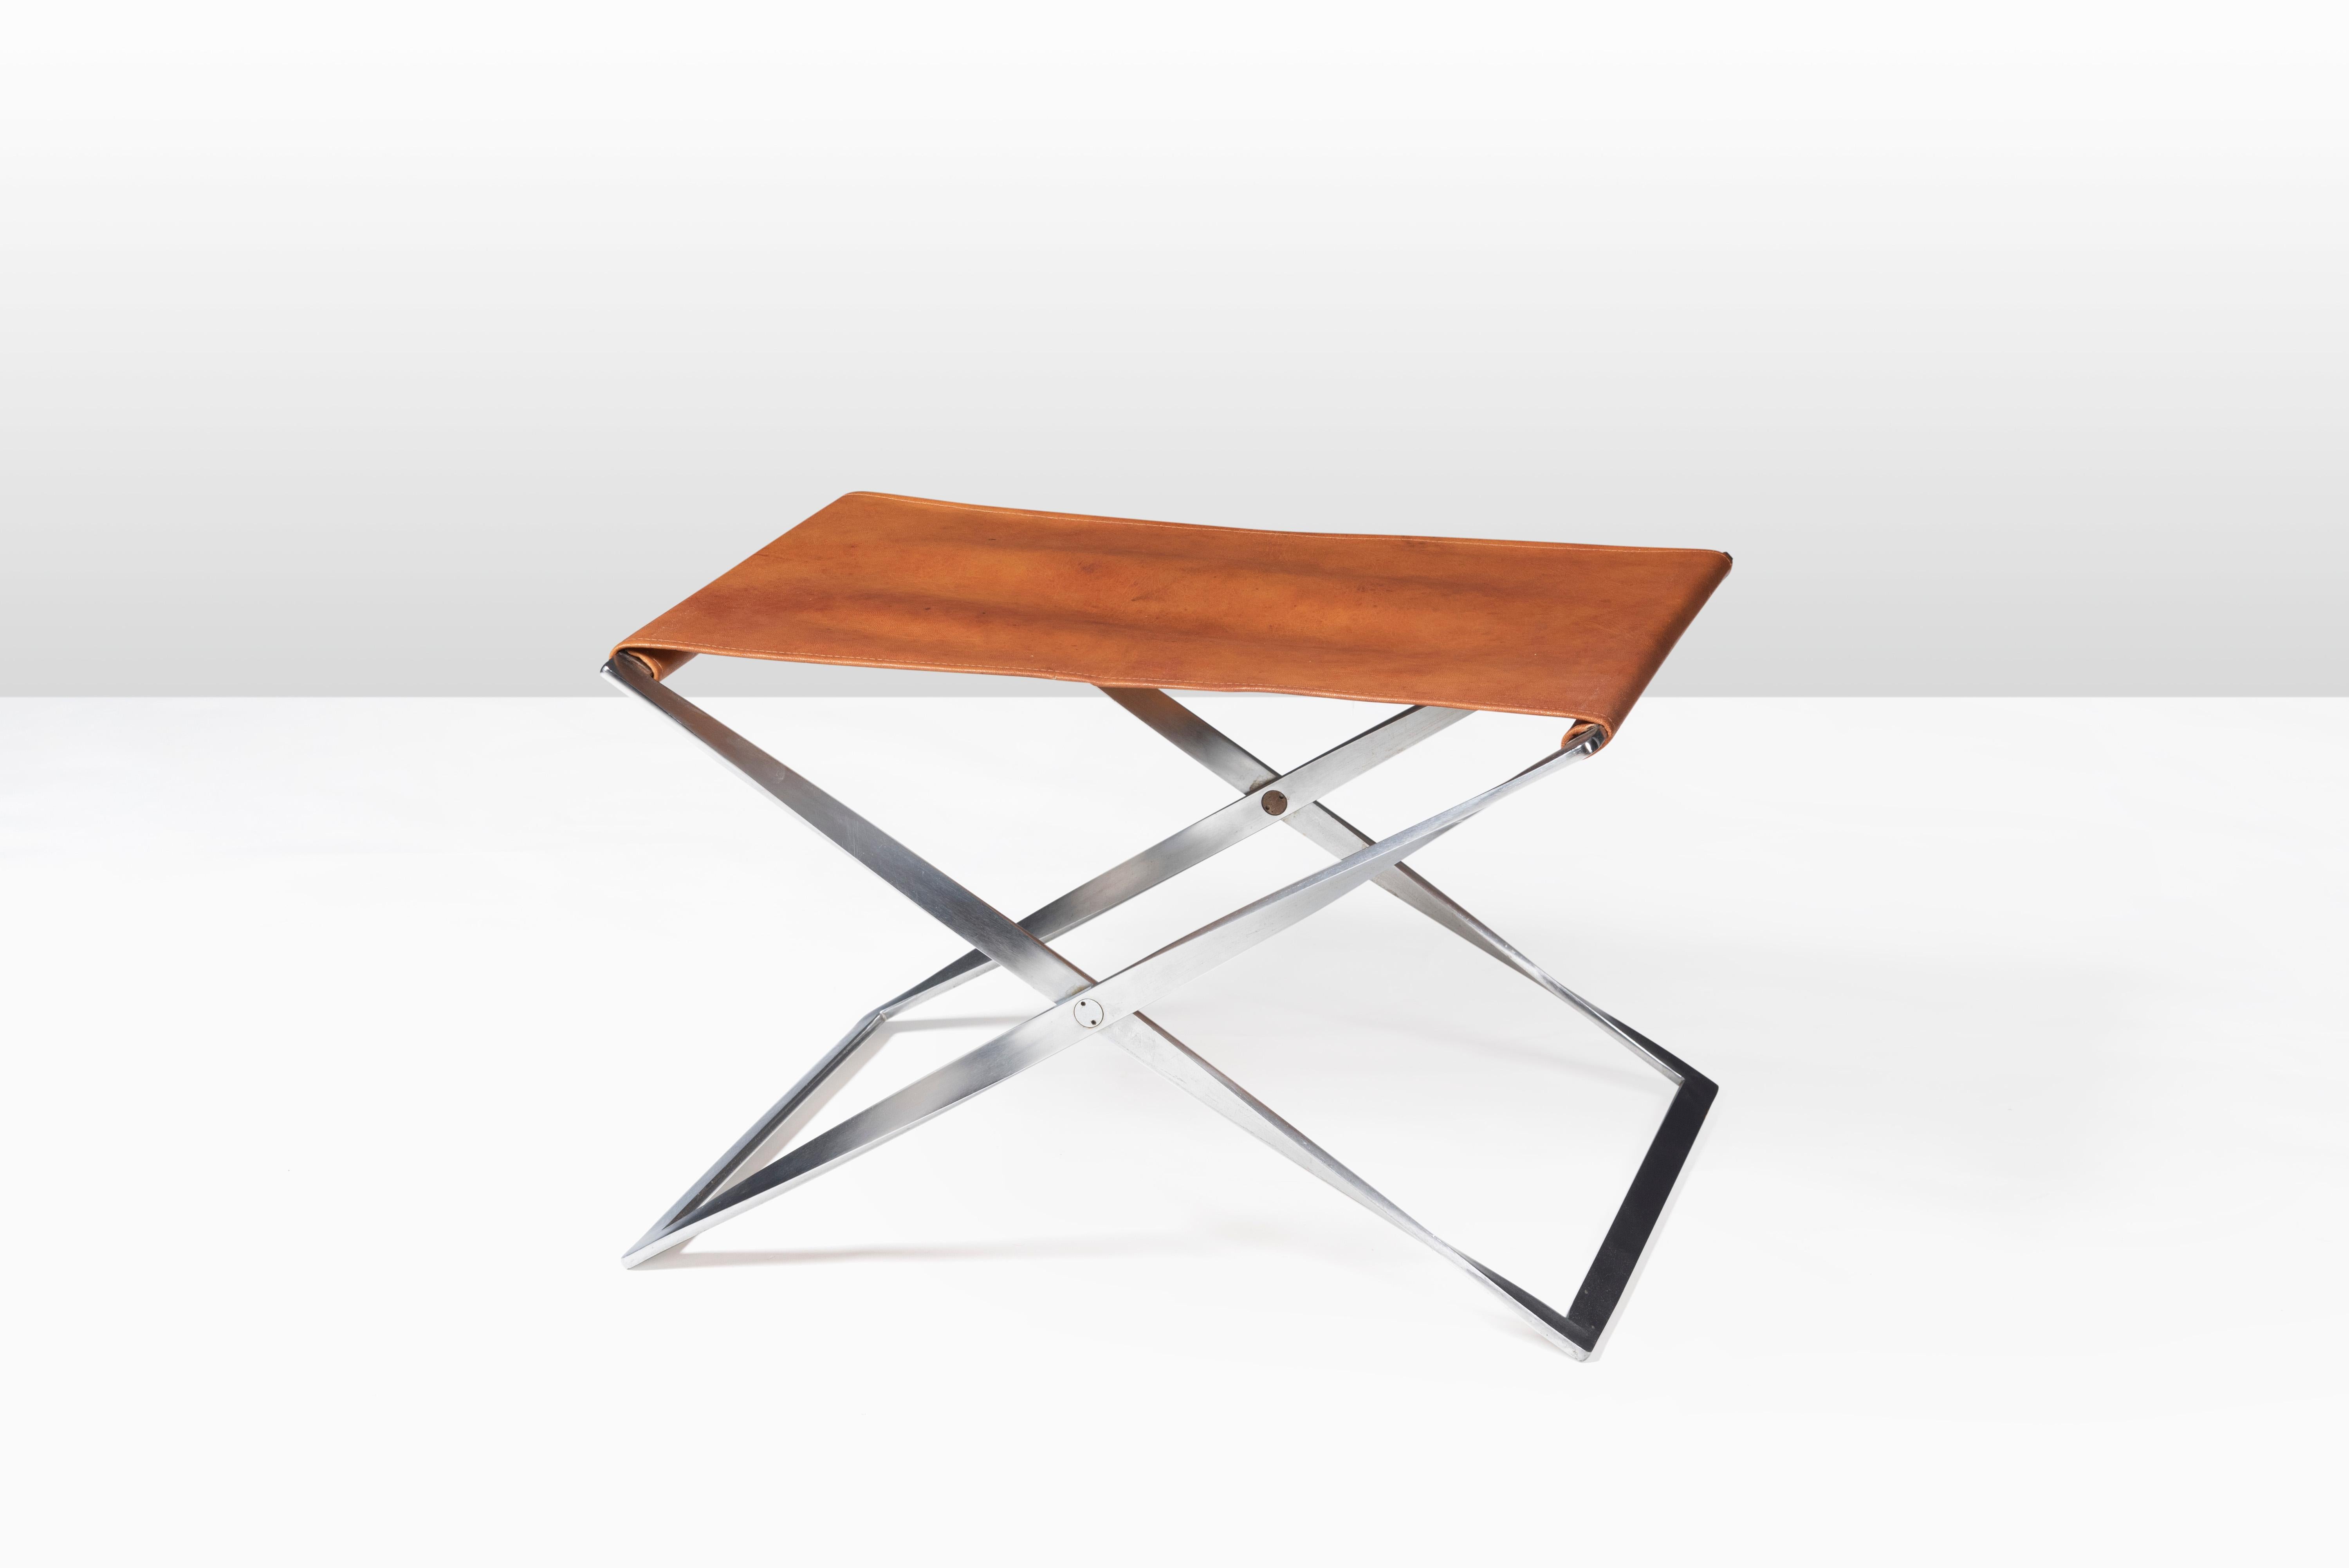 The iconic PK 91 folding stool by Poul Kjærholm. Designed in 1961 and manufactured by E. Kold Christensen A/S, Copenhagen, Denmark, this stool is from an early production. This stool does not have the EKC stamp. The early production did not have a